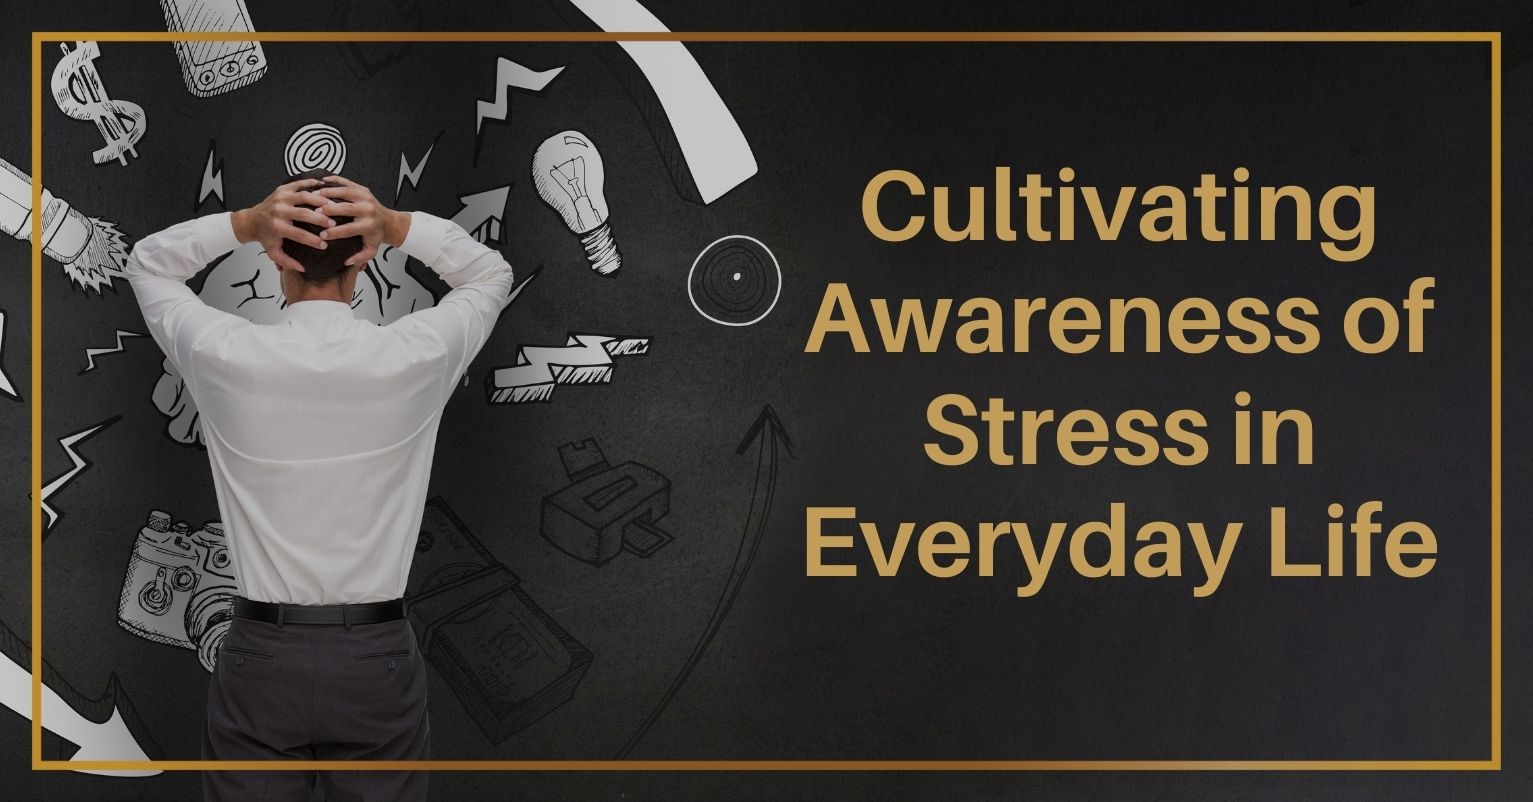 Cultivating Awareness of Stress in Everyday Life